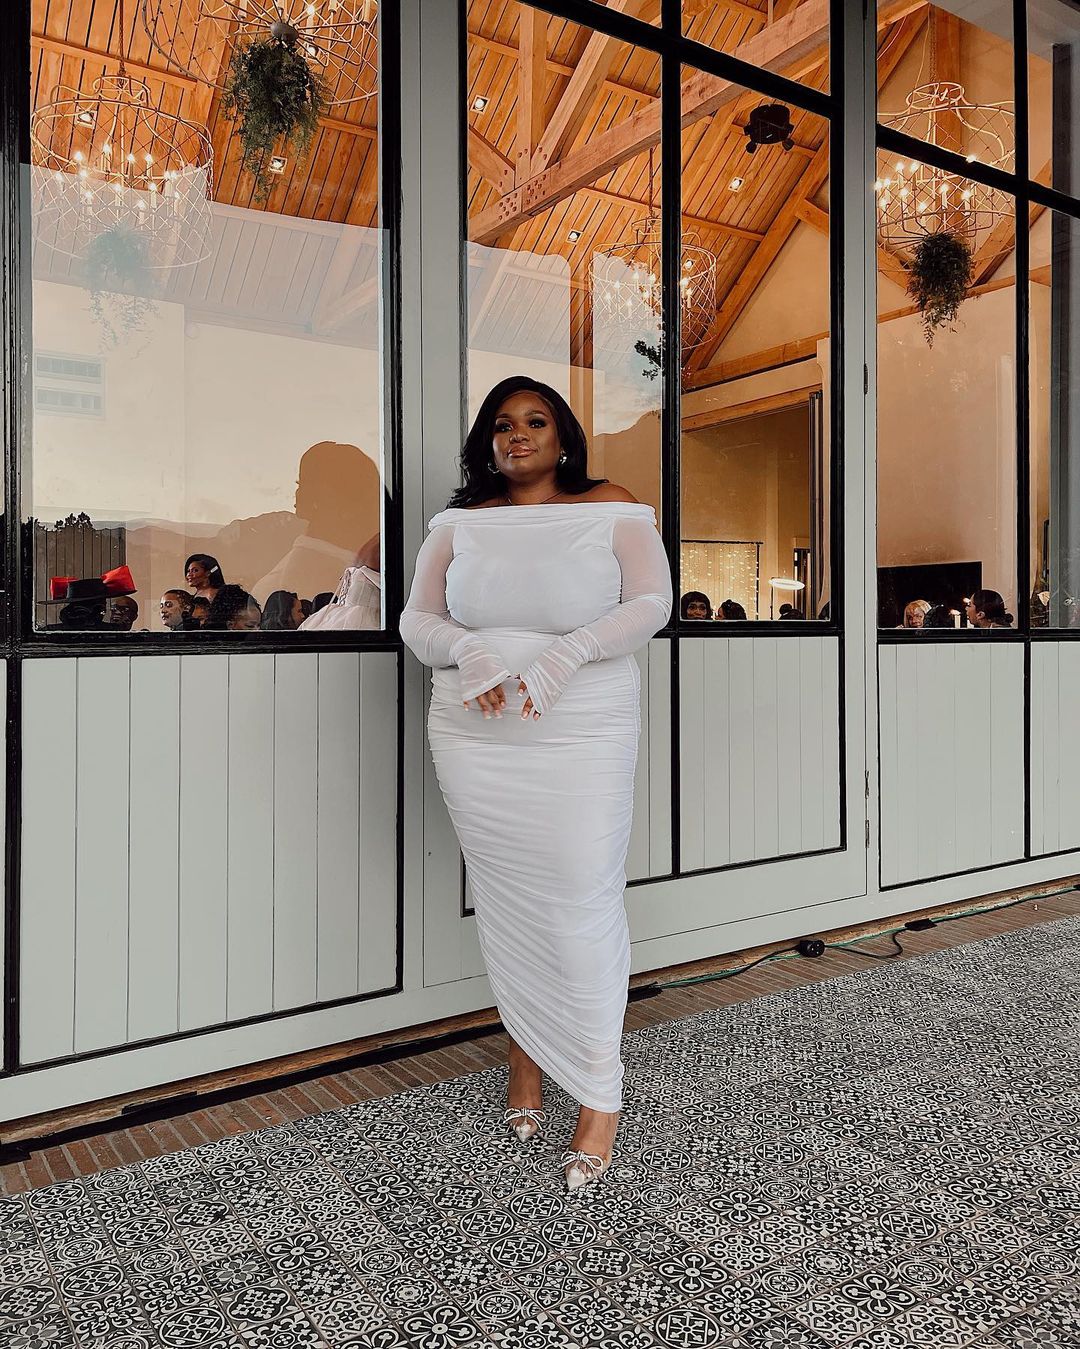 See the 8 Times Cynthia Gwebu Proved She is That Curvy #BellaStylista to Take Style Notes From